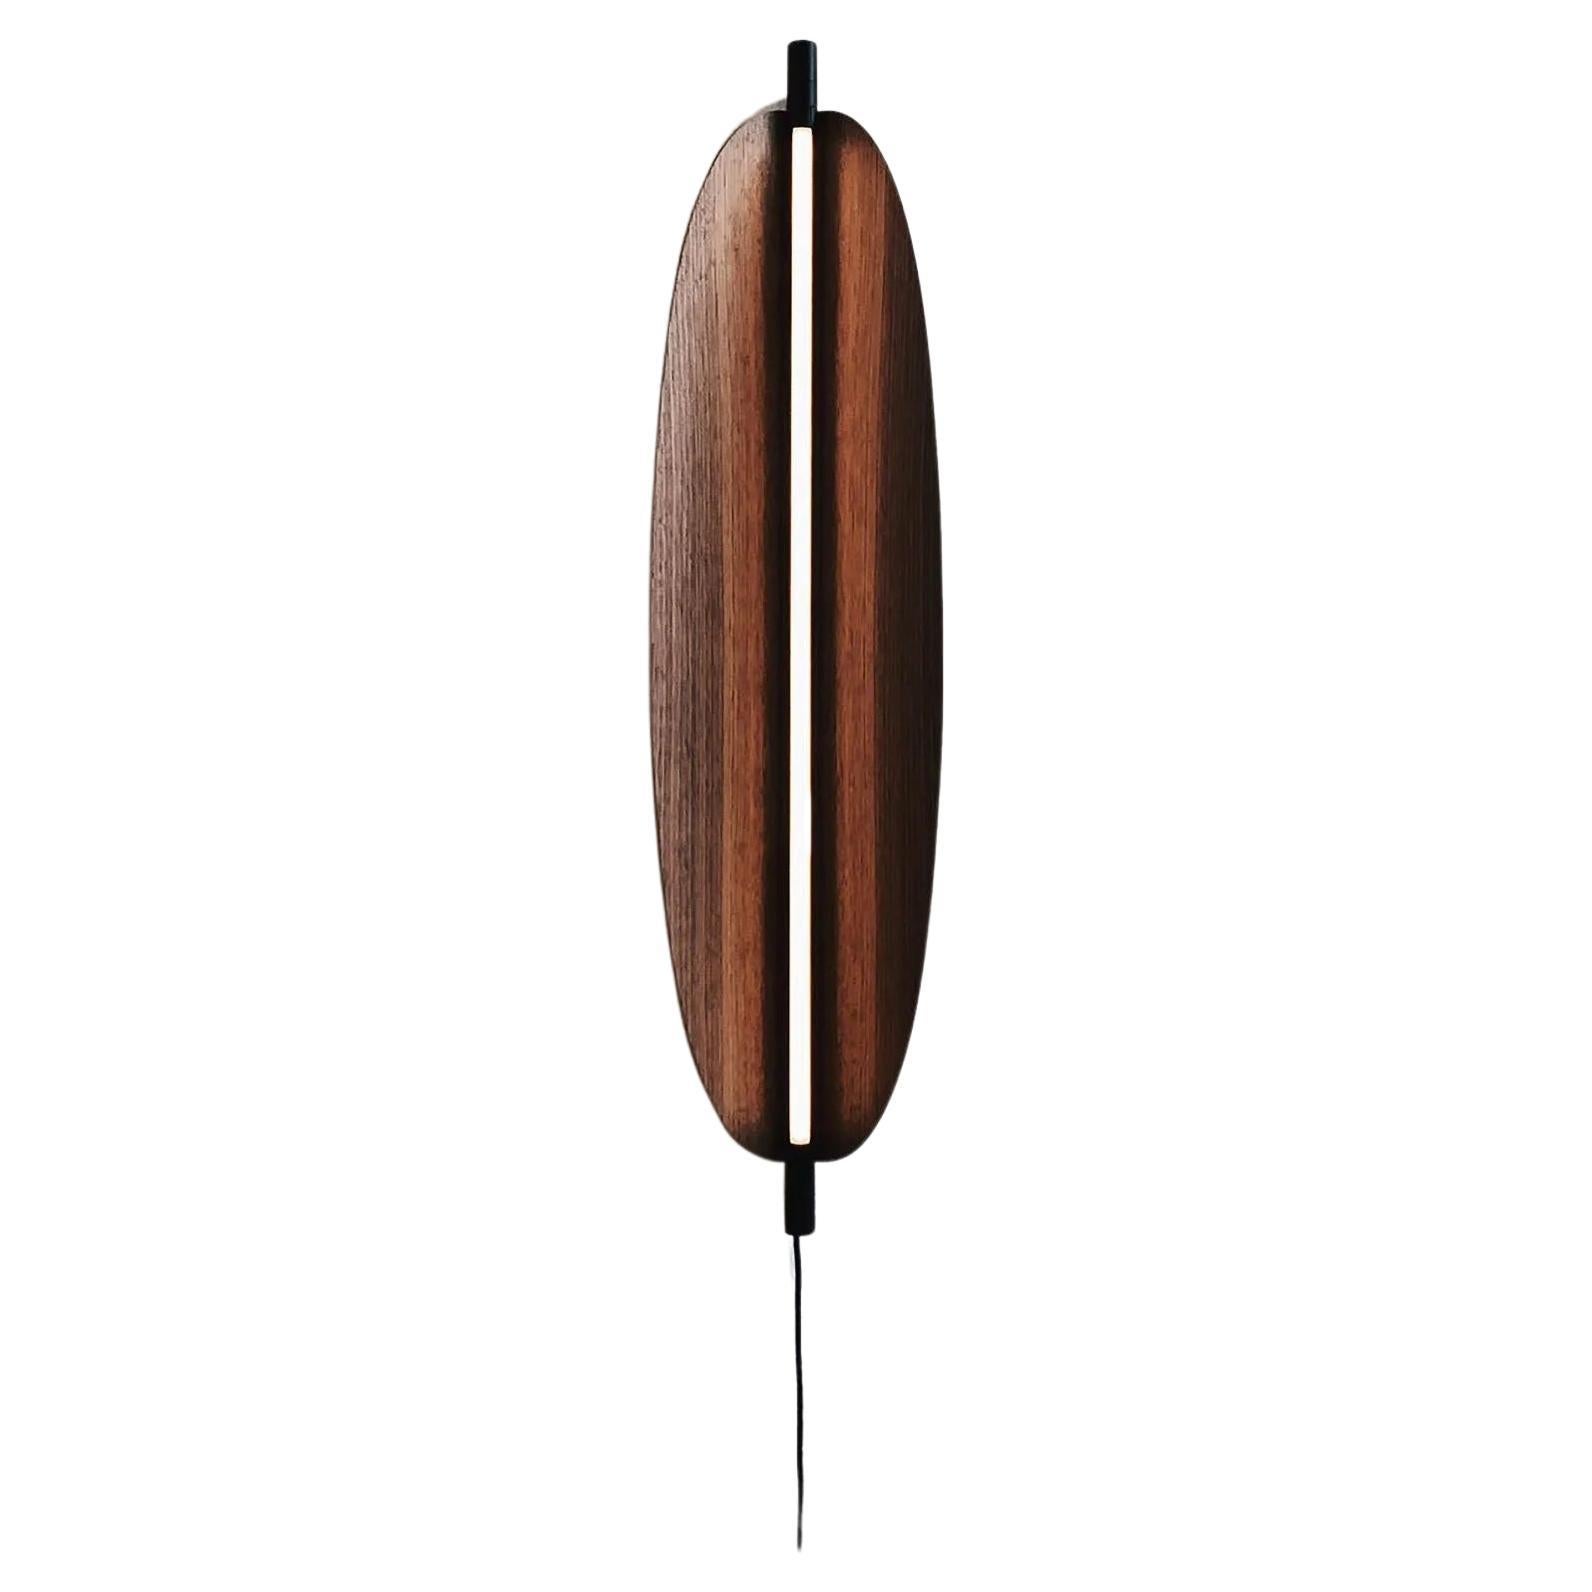 Contemporary Wall Lamp 'Thula 562.42' by Federica Biasi x Tooy, Black + Walnut